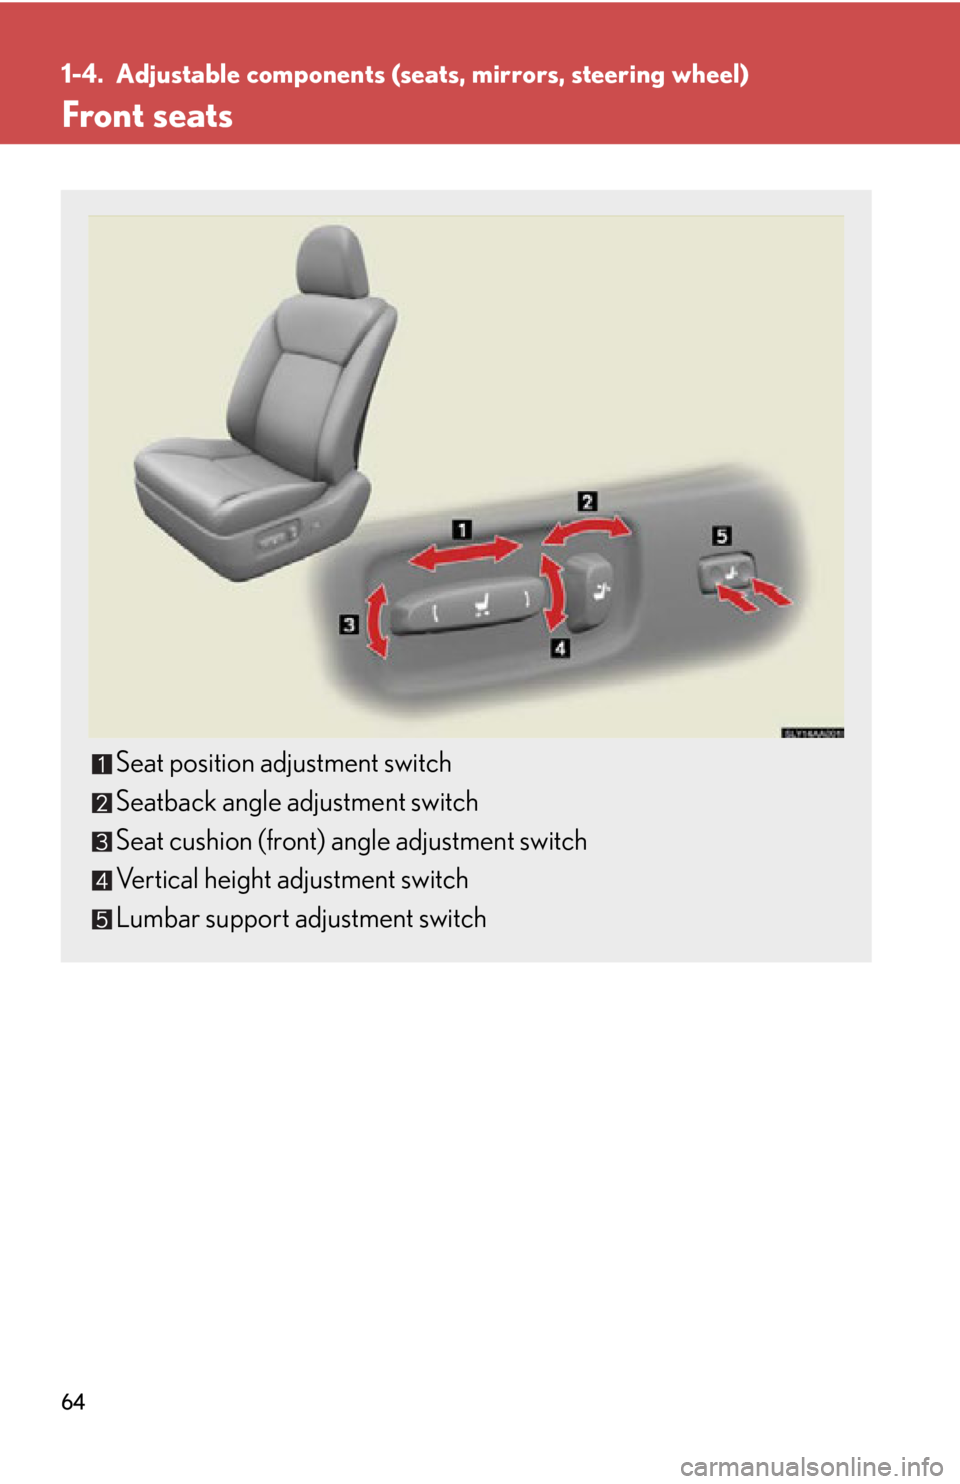 Lexus HS250h 2010  Setup / LEXUS 2010 HS250H OWNERS MANUAL (OM75006U) 64
1-4. Adjustable components (seats, mirrors, steering wheel)
Front seats
Seat position adjustment switch
Seatback angle adjustment switch
Seat cushion (front) angle adjustment switch
Vertical height